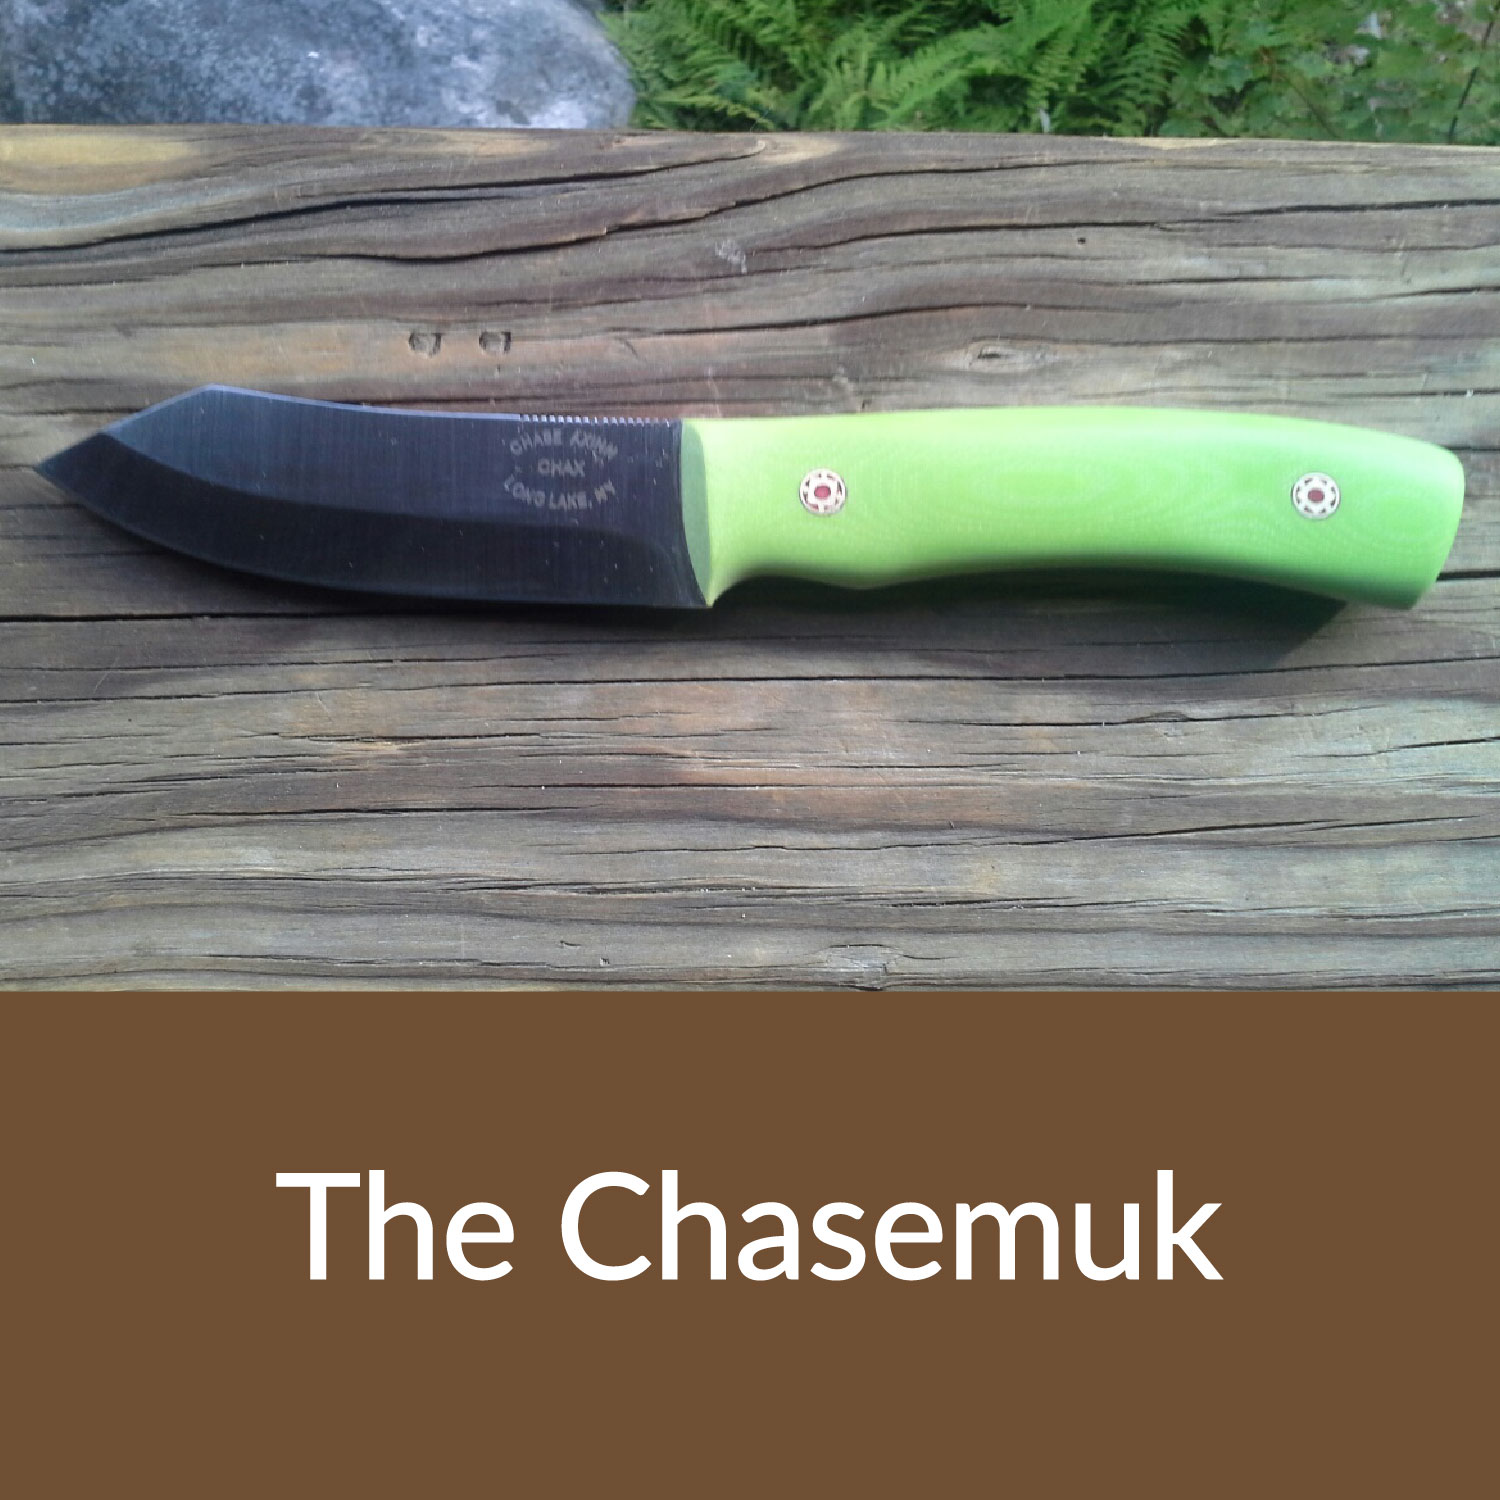 The Chasemuk